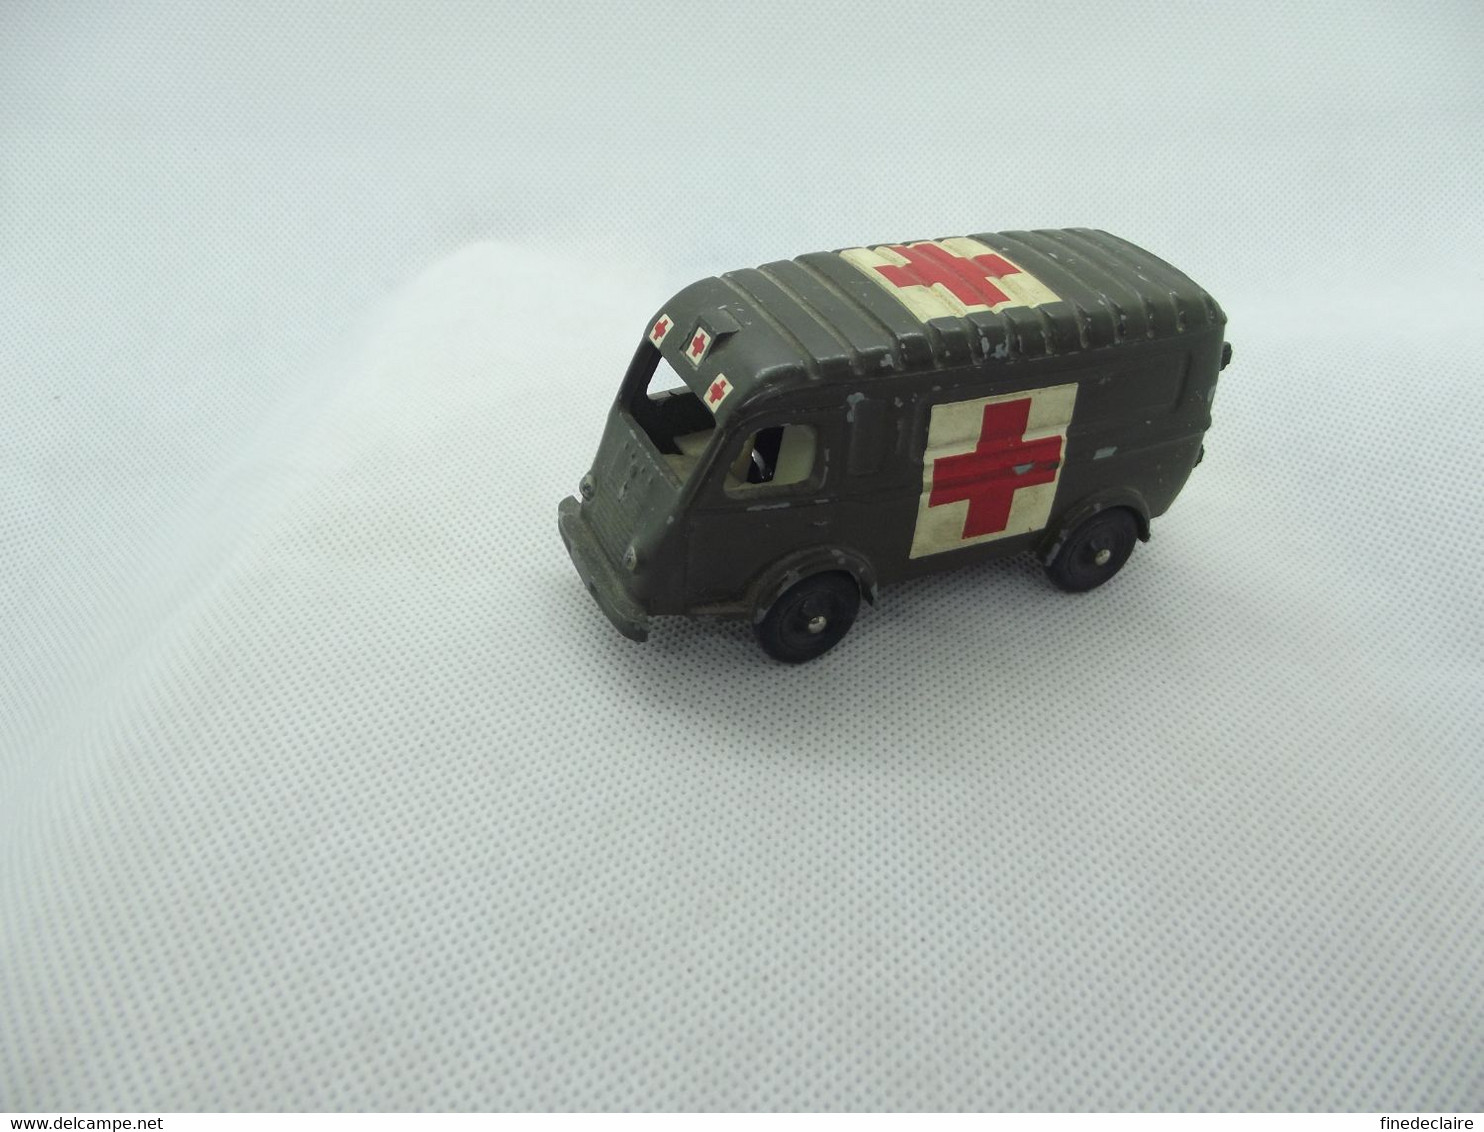 CIJ - Ambulance Militaire Renault 1000Kgs - Made In France - Vehicles